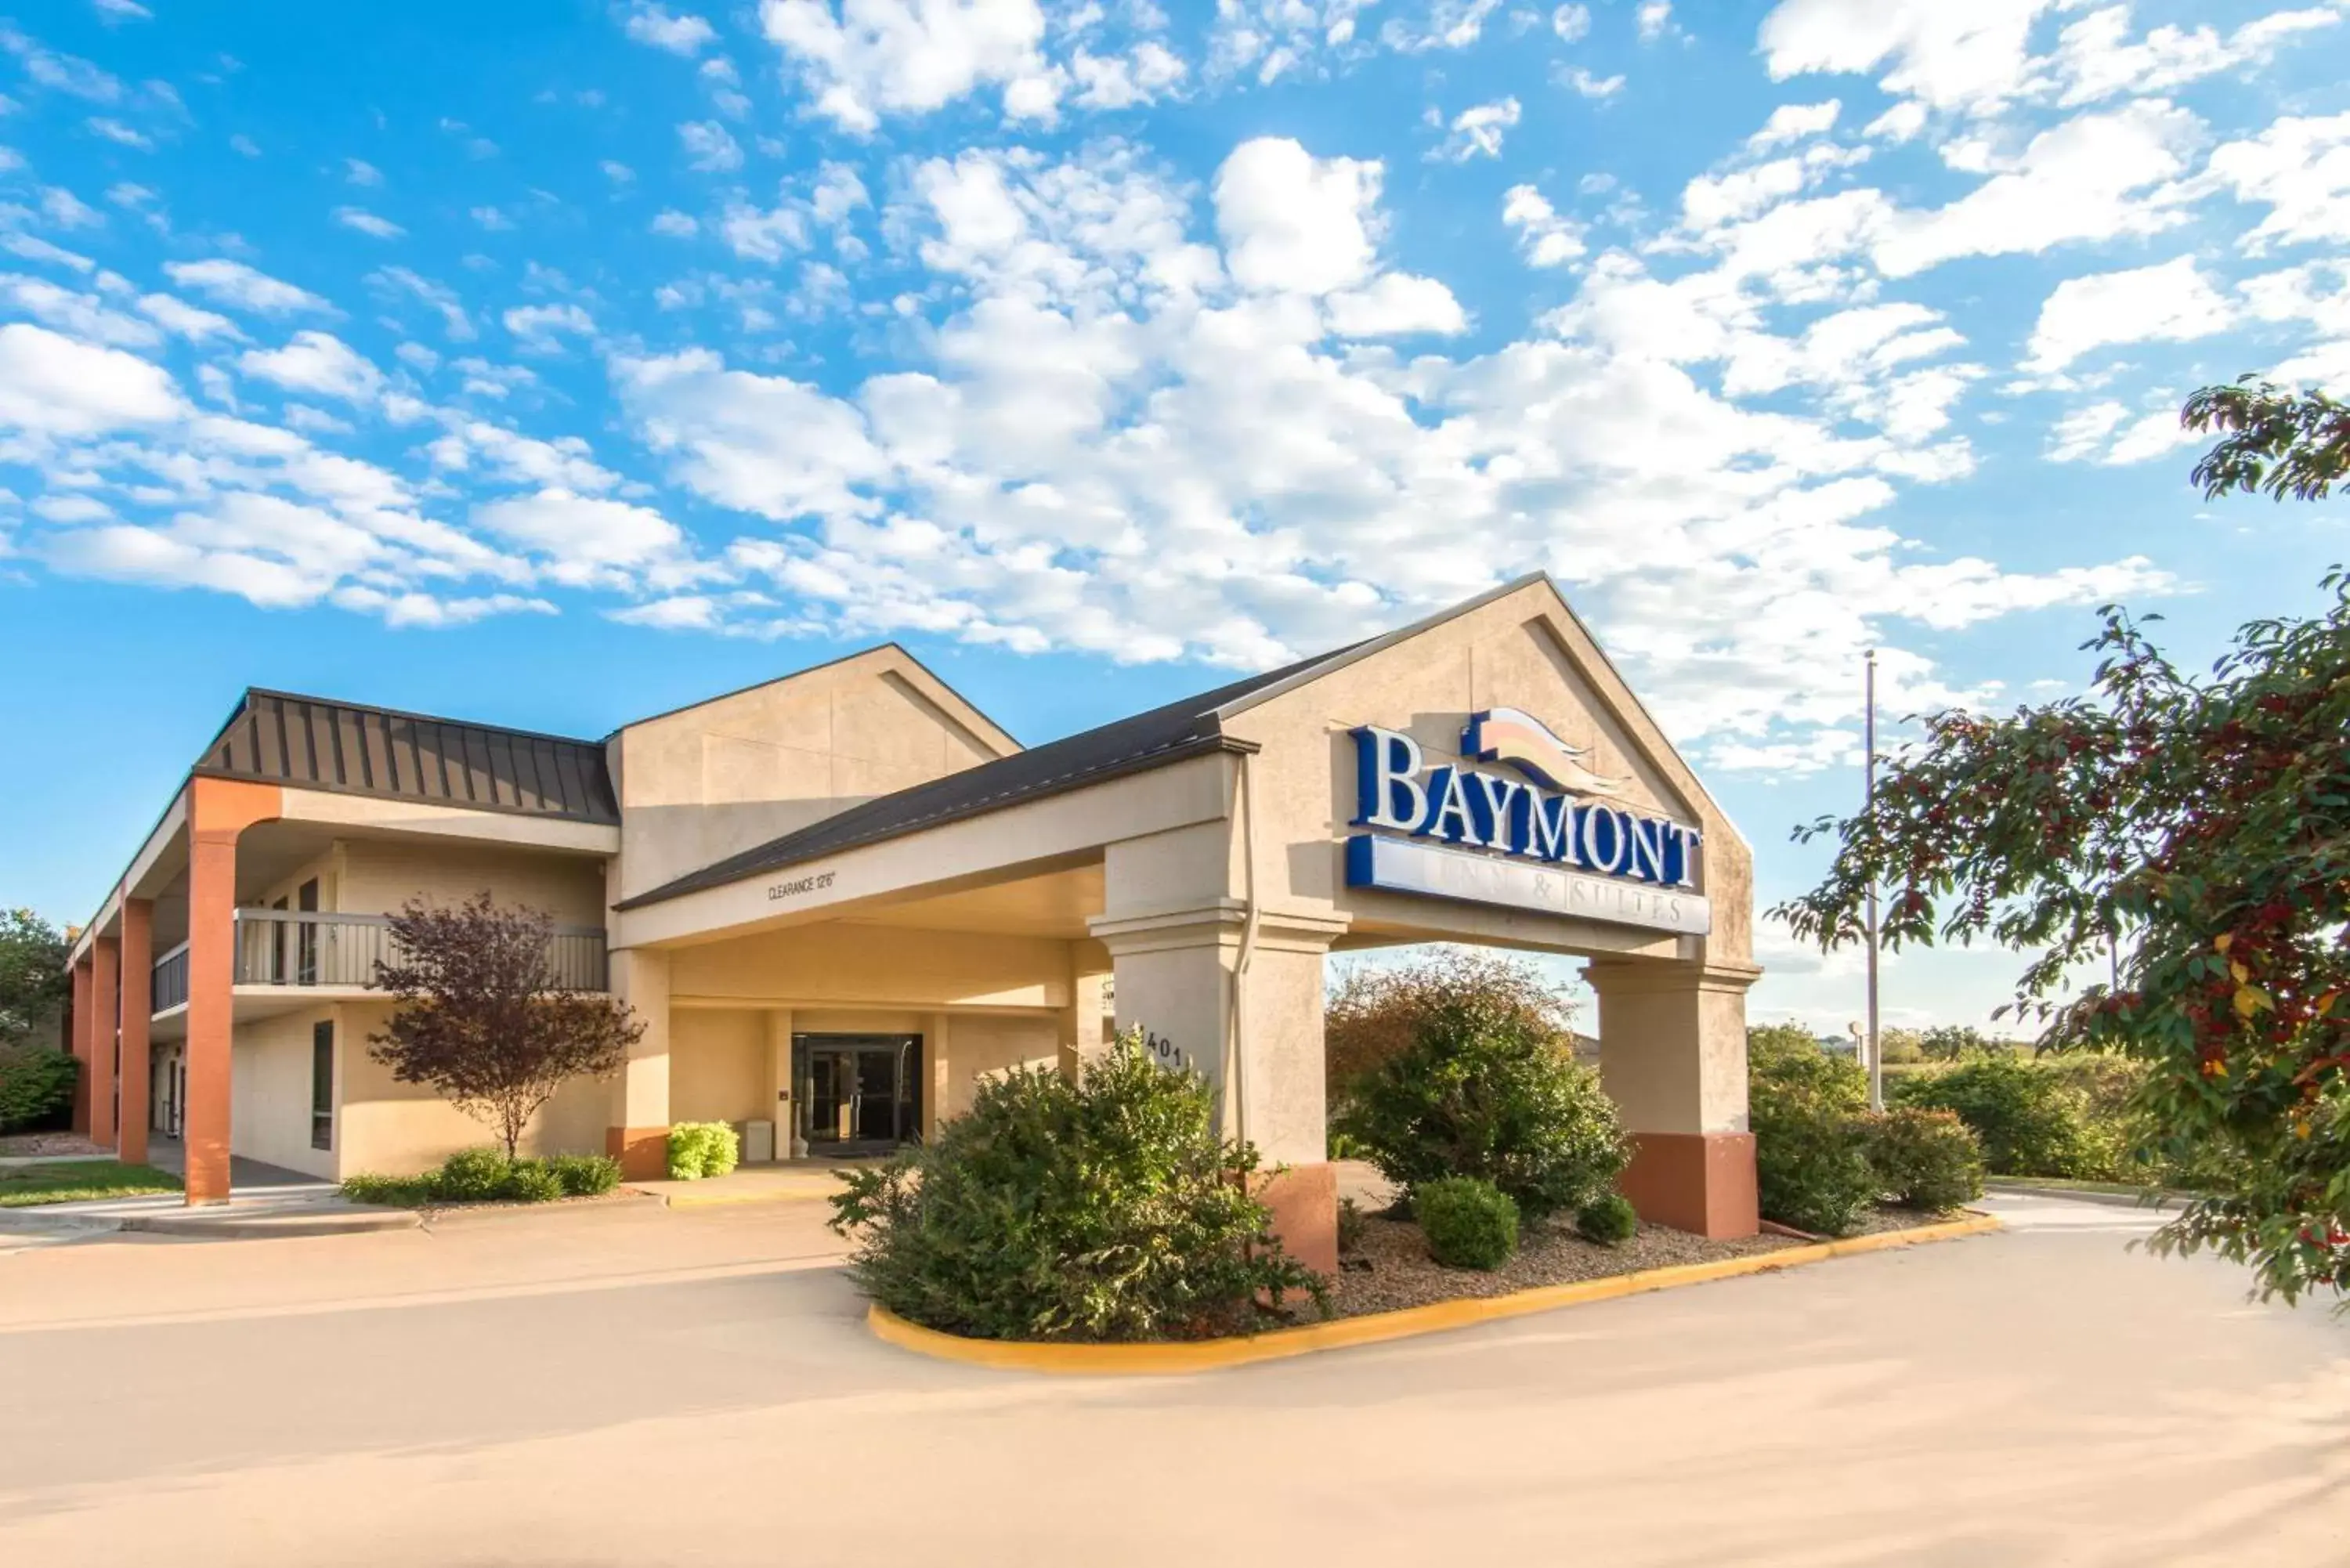 Property building in Baymont by Wyndham Topeka